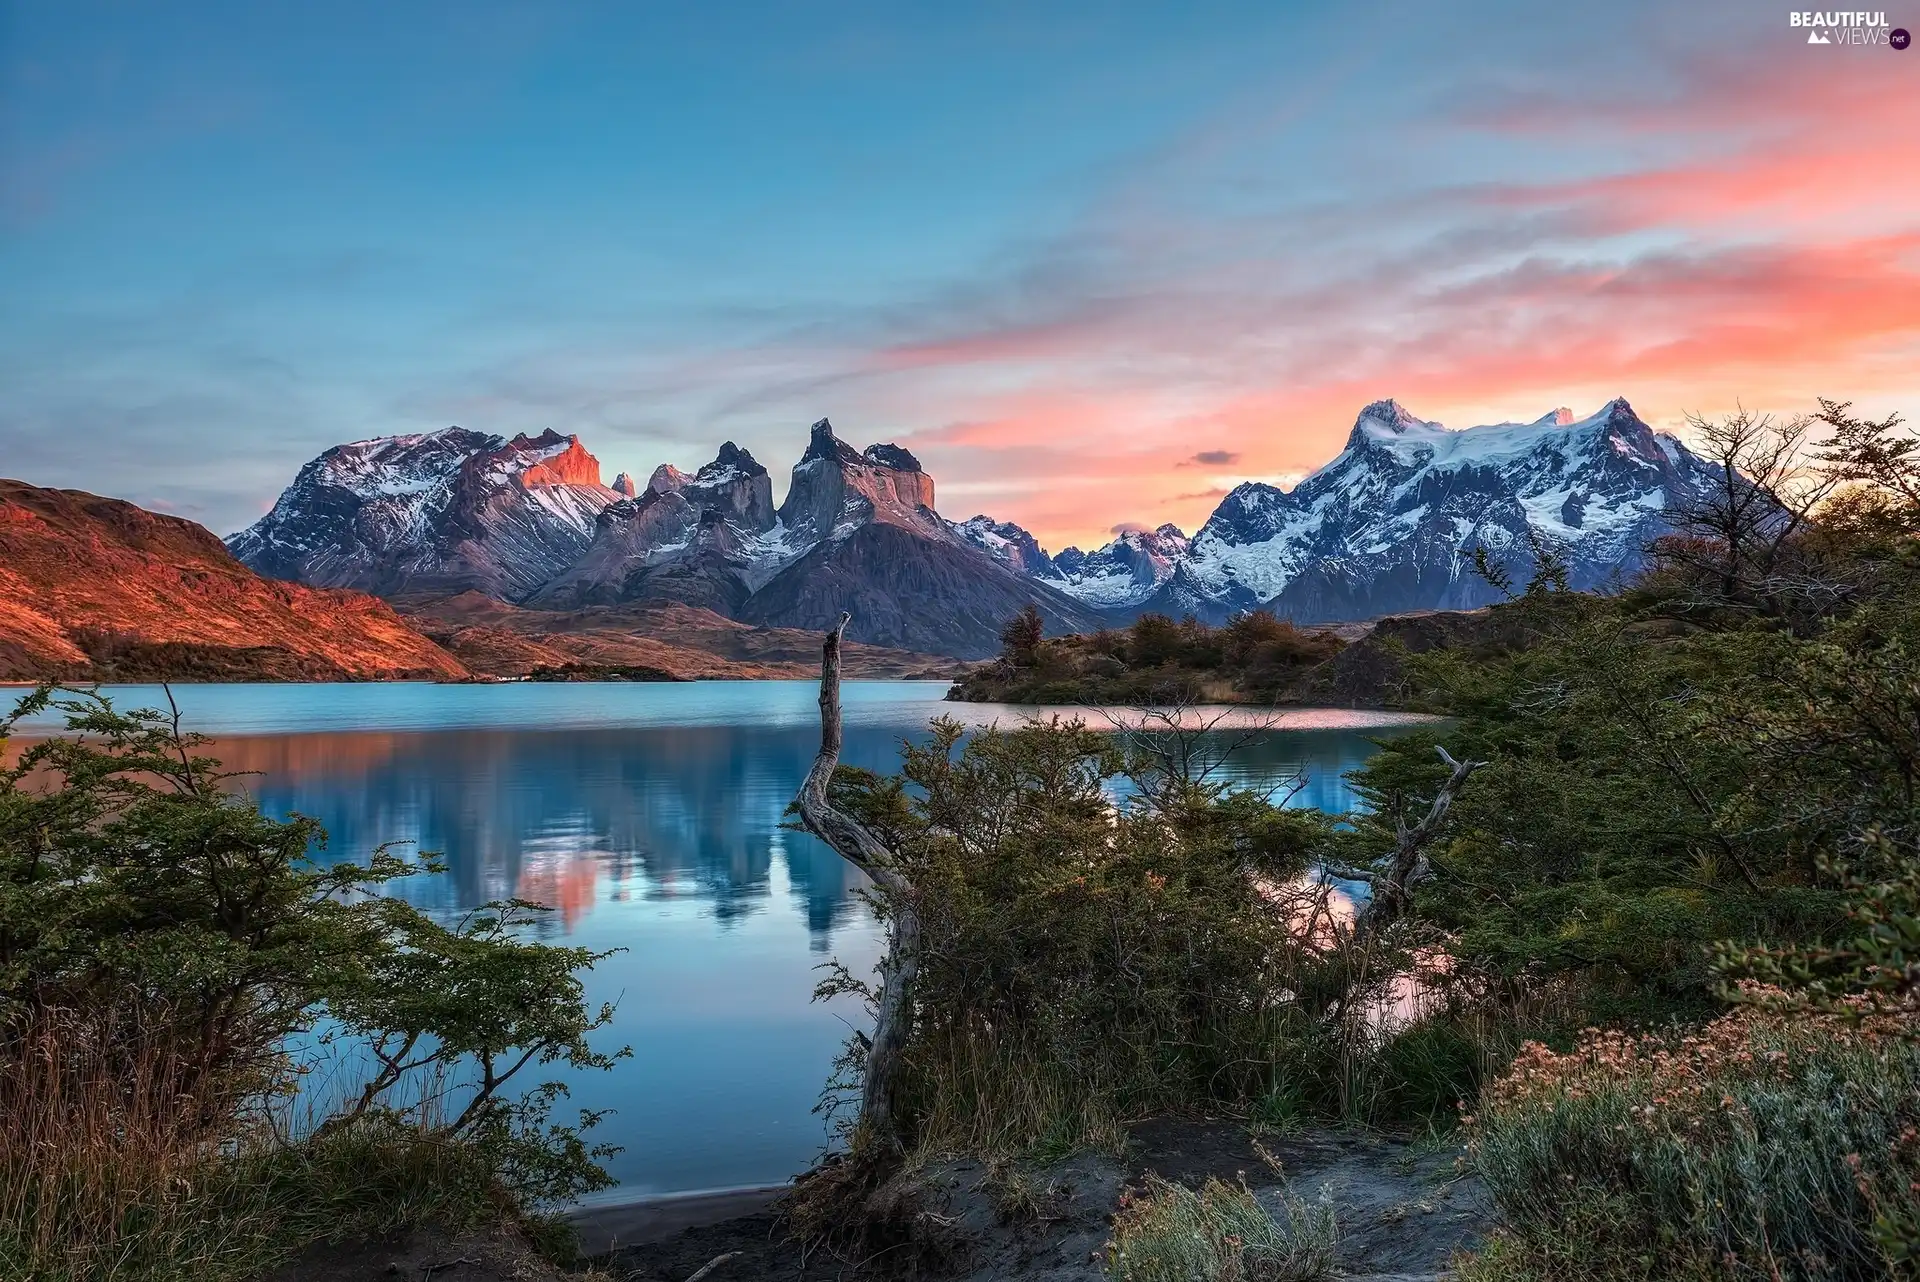 Patagonia, Chile, Mountains of Torres del Paine, Snowy, Bush, Torres del Paine National Park, lake, Great Sunsets, peaks